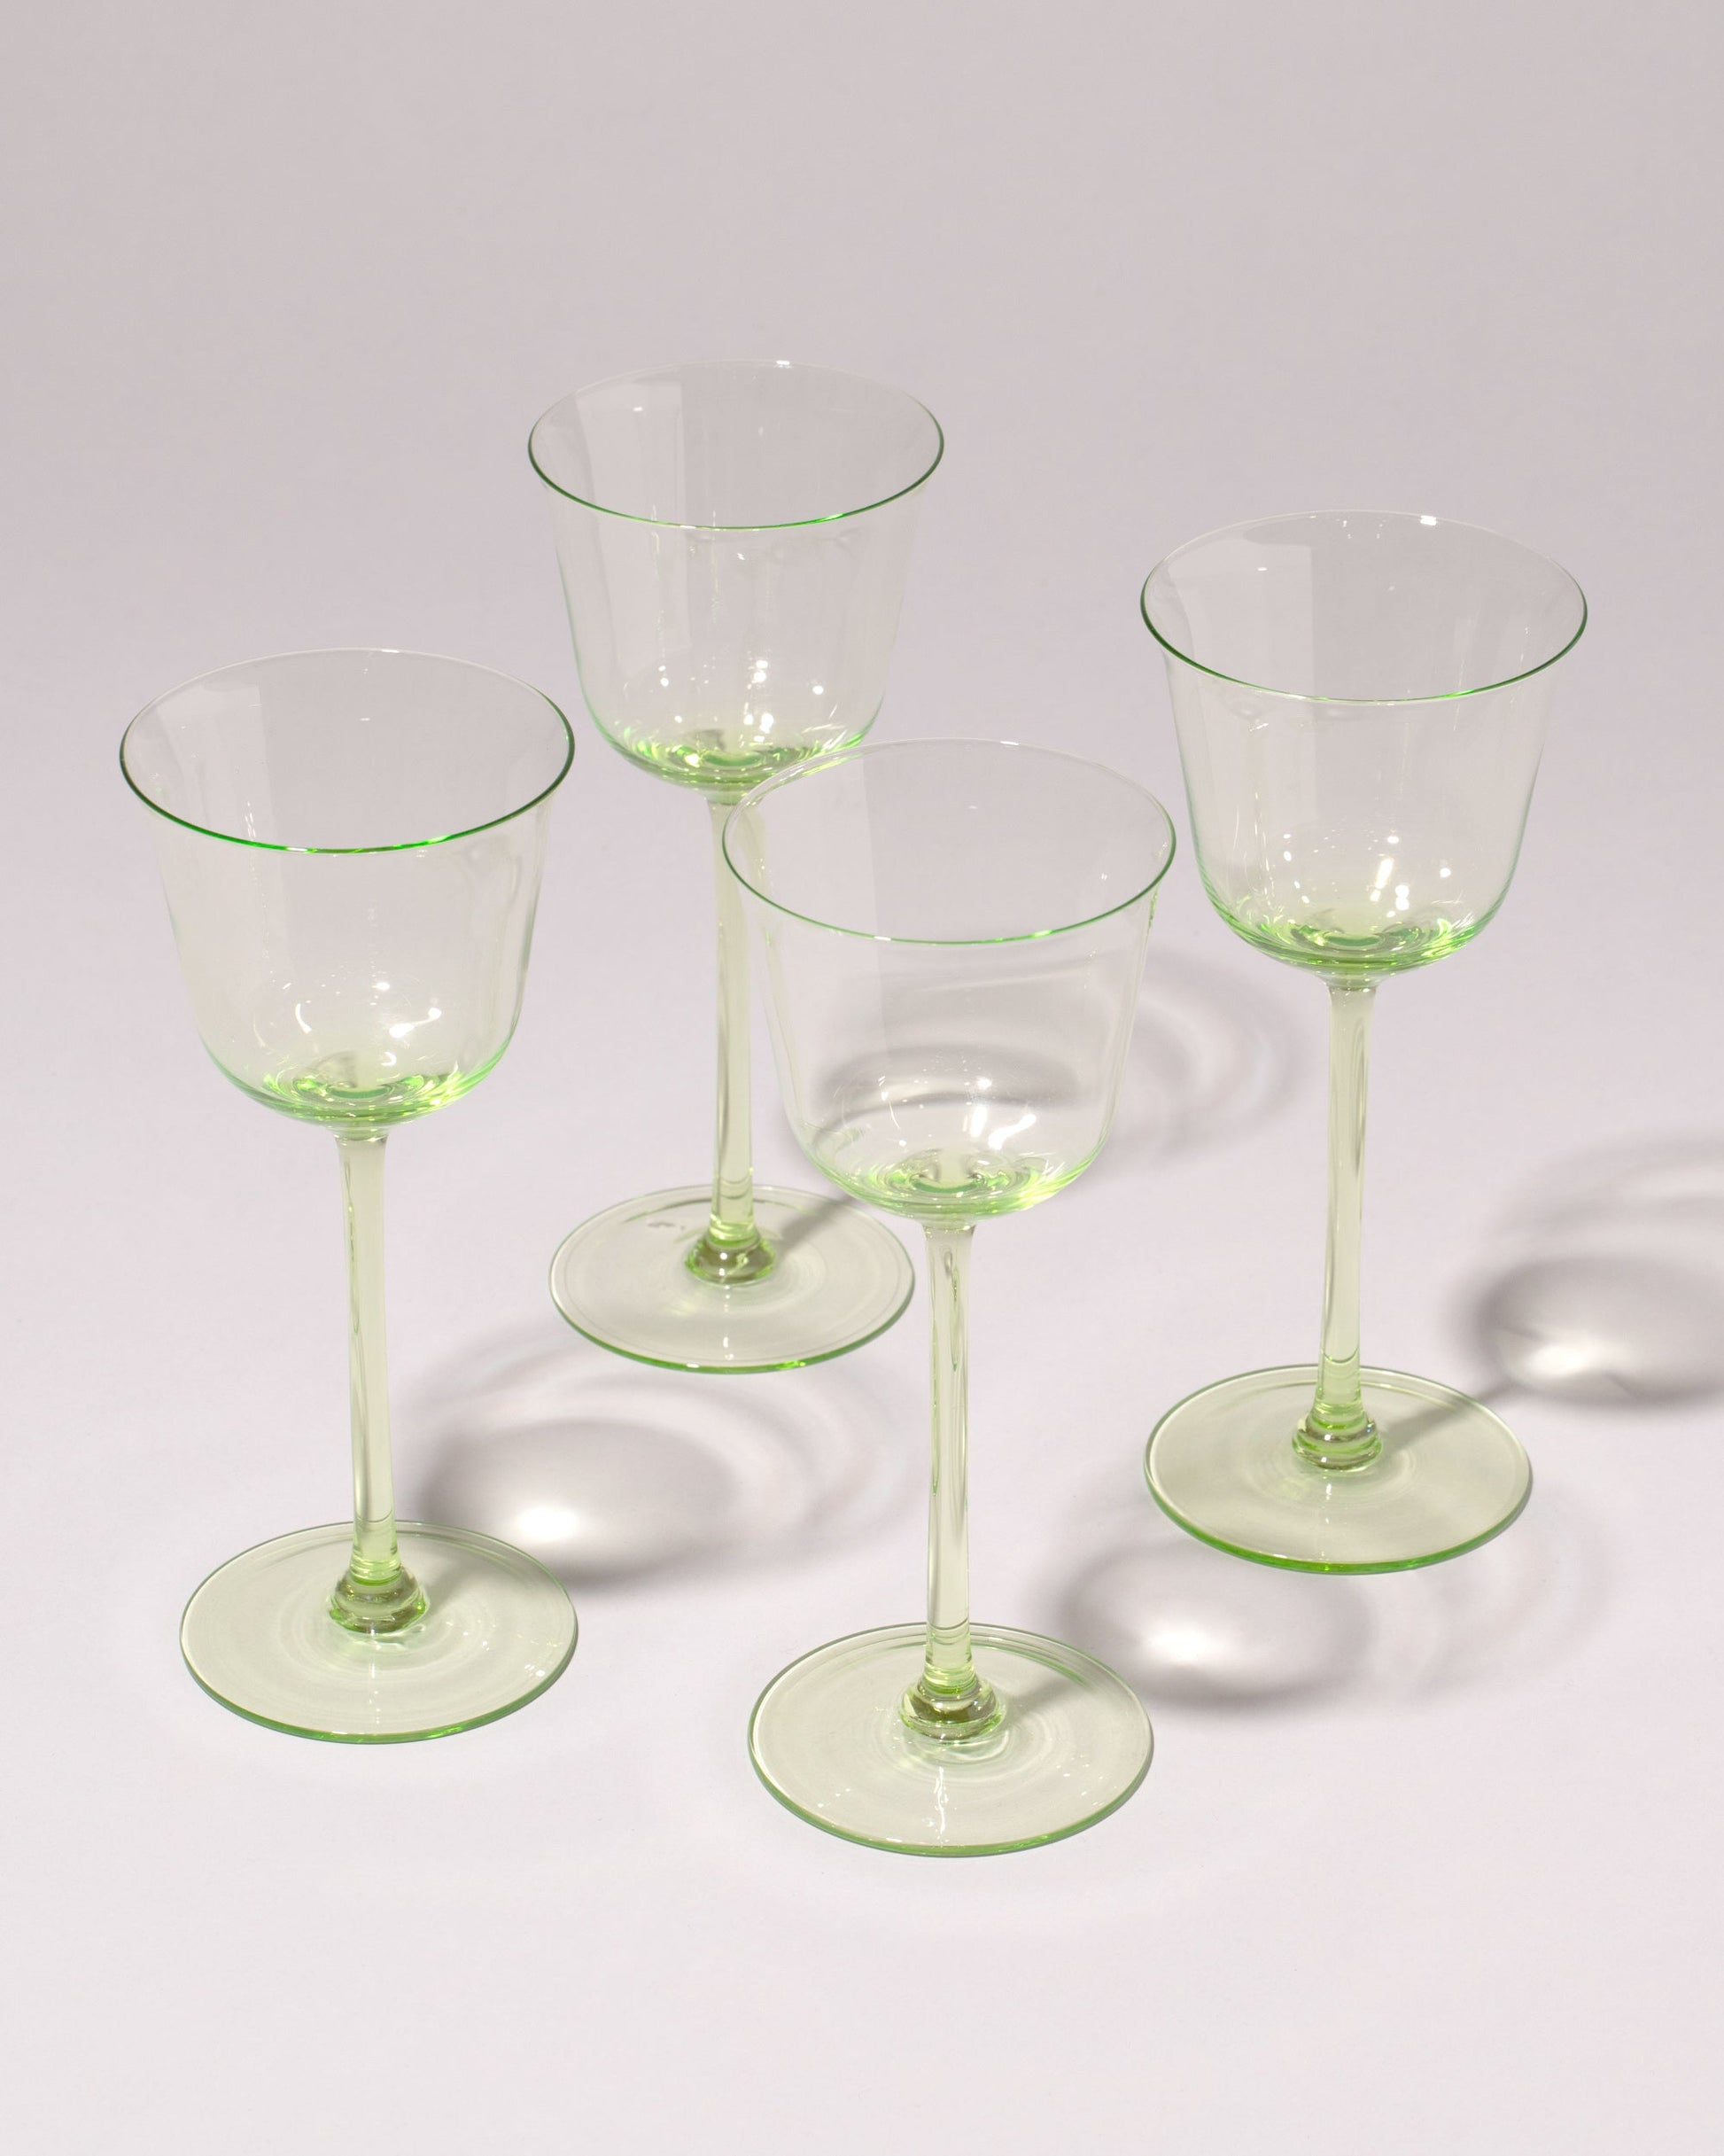  Grace Wine Glass by Ann Demeulemeesters on light color background.